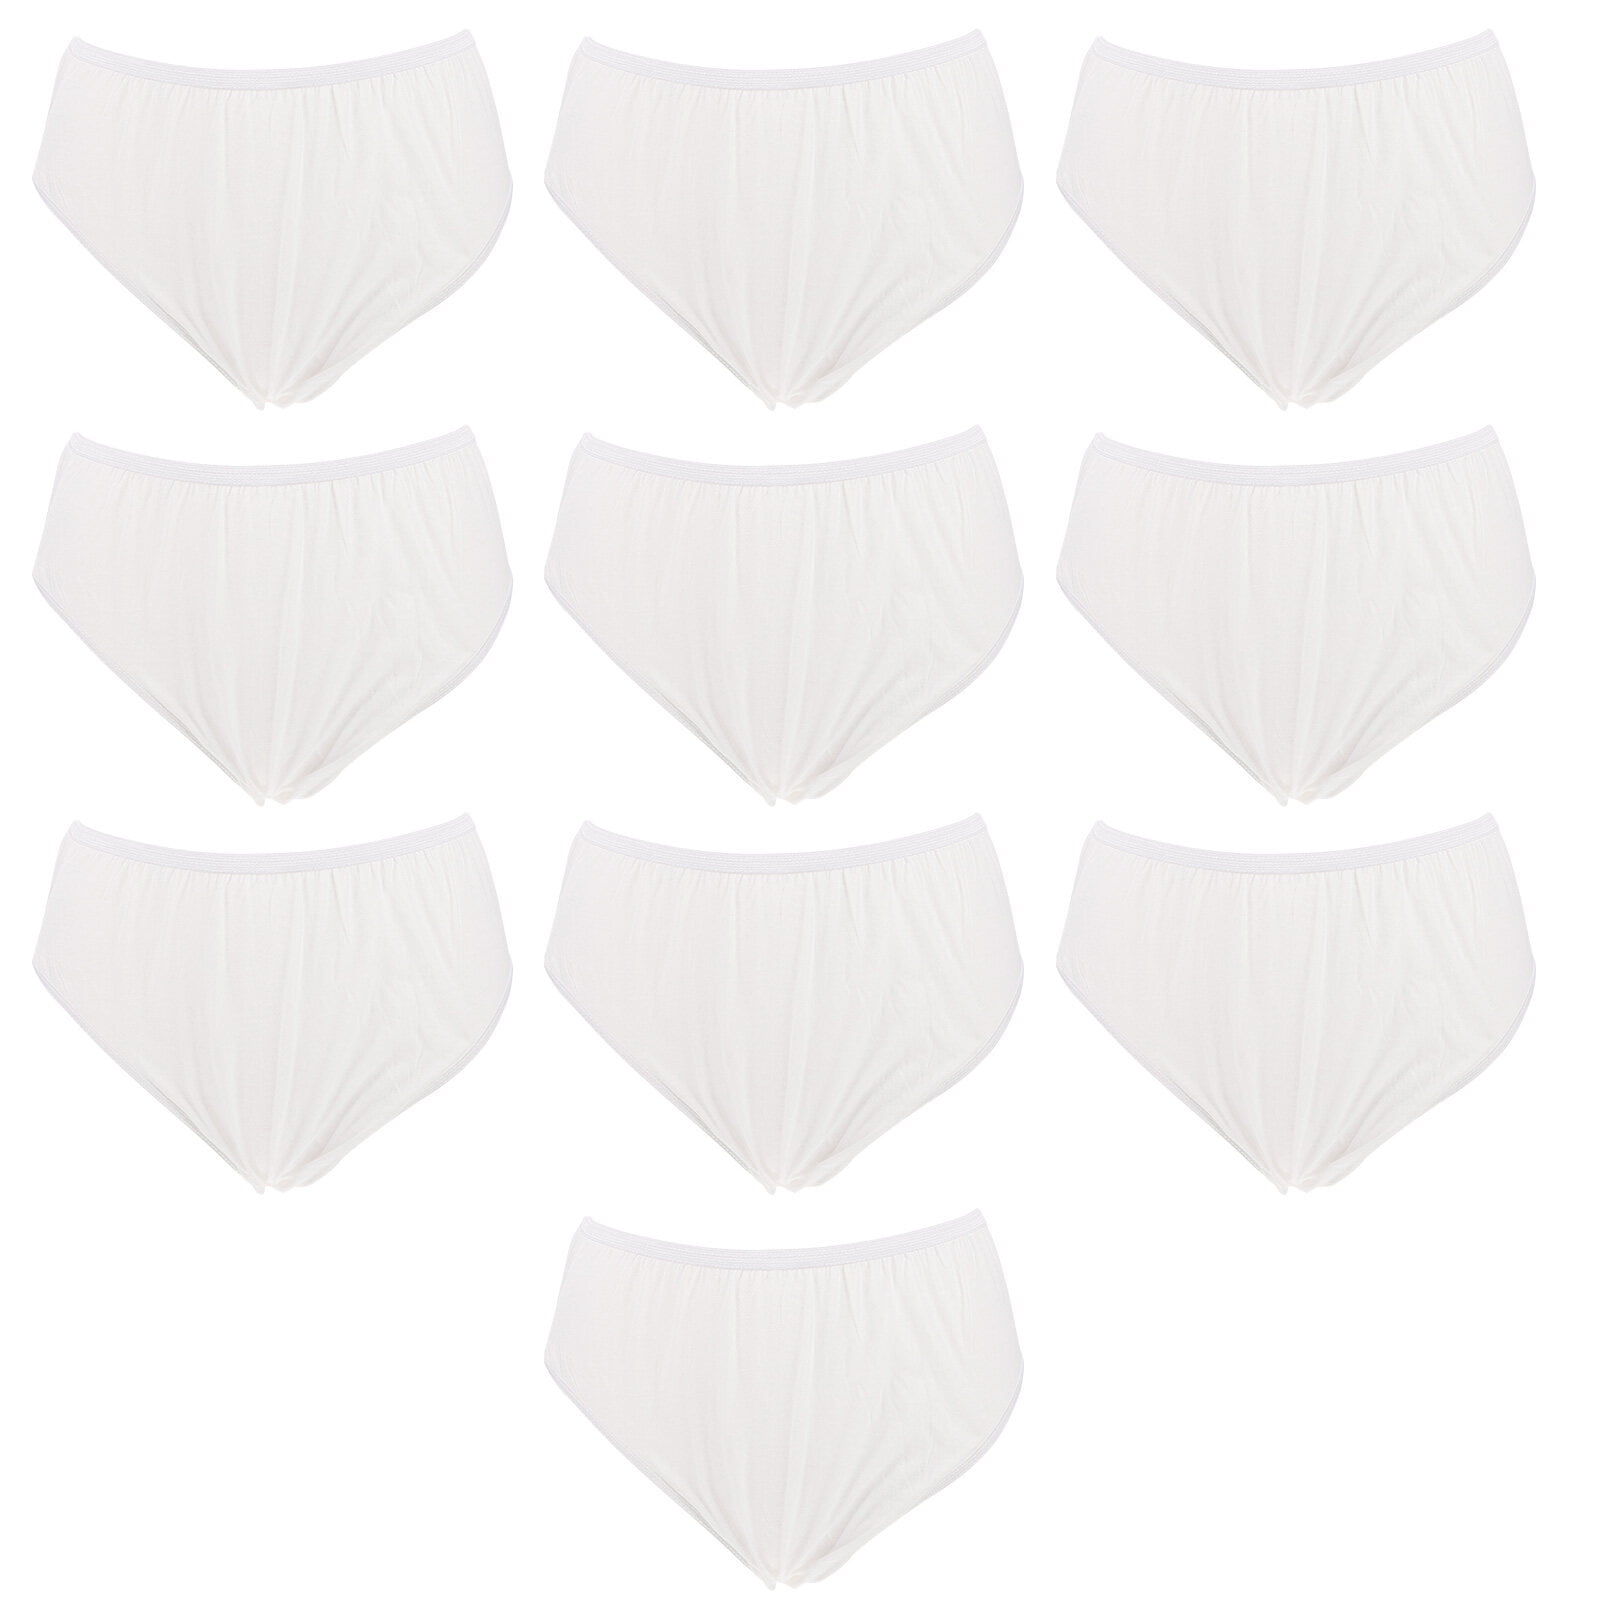 Men's Disposable Briefs 10-Pack, Perfect for Travel